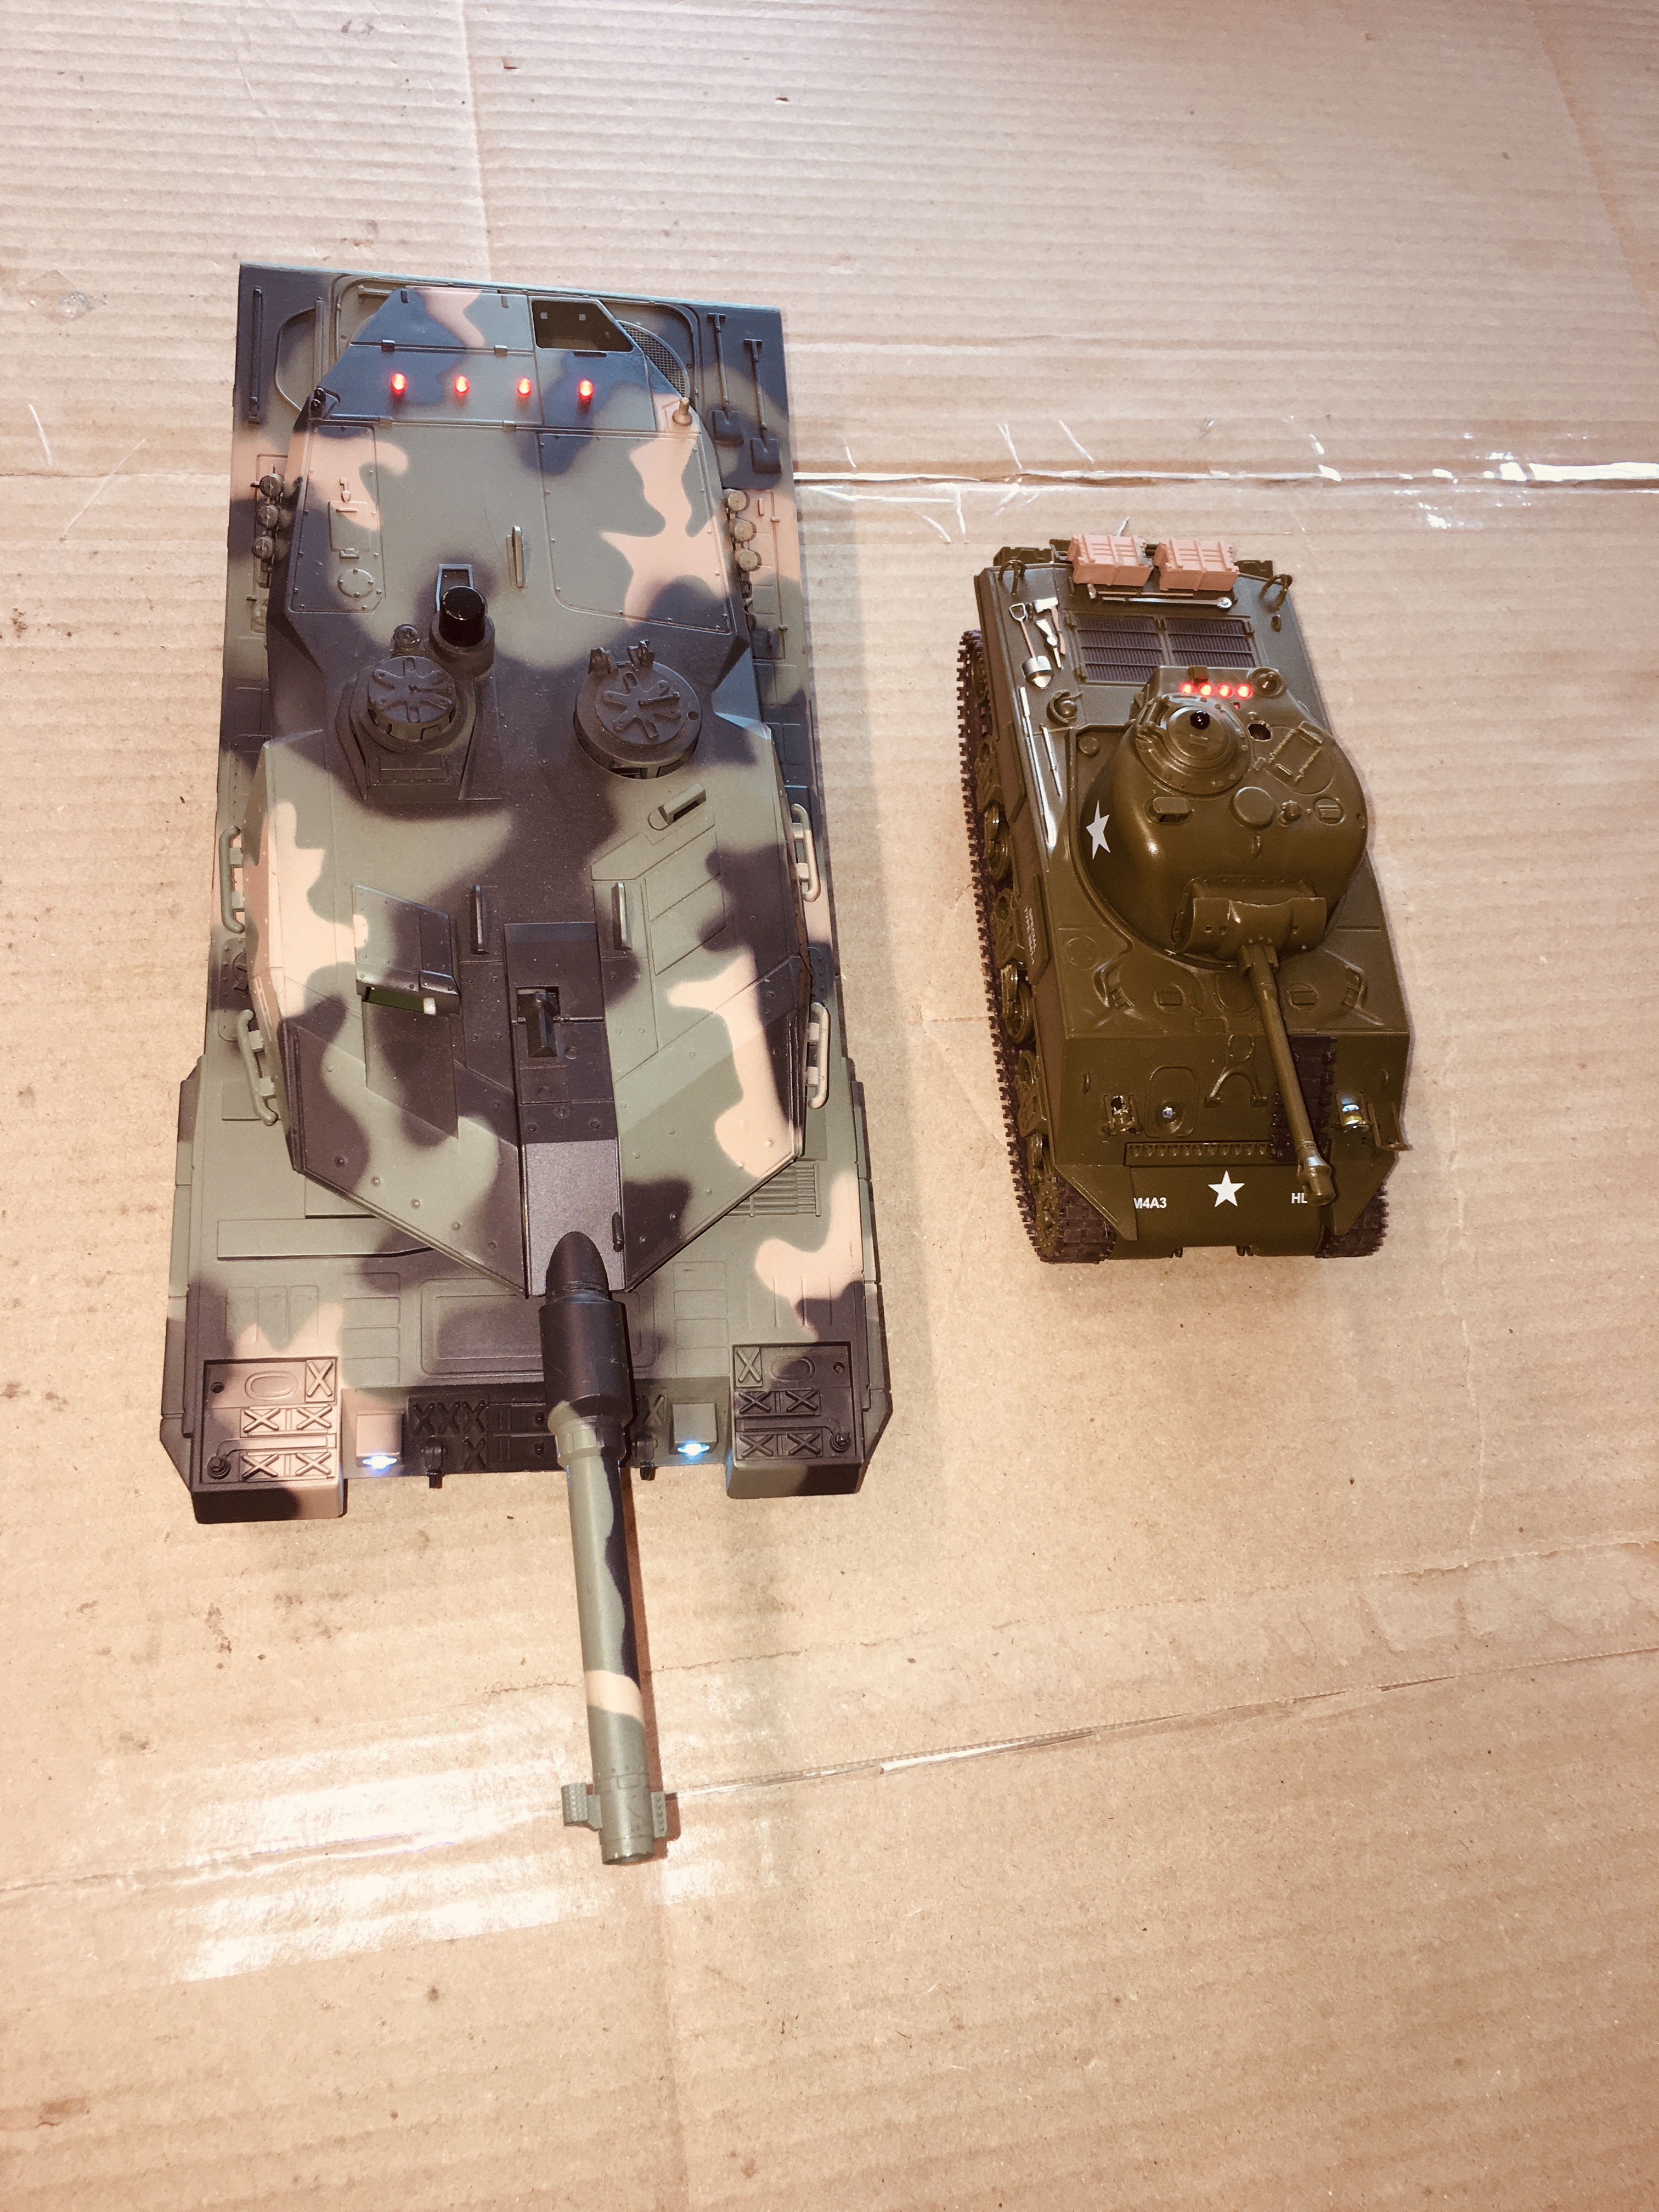 1/24 vs 1/30. The Tank controller board(s) are interchangeable between these two tanks. So what I have done here is mod the 1/30 Tank to 2s lipo. Works way better with 2s.